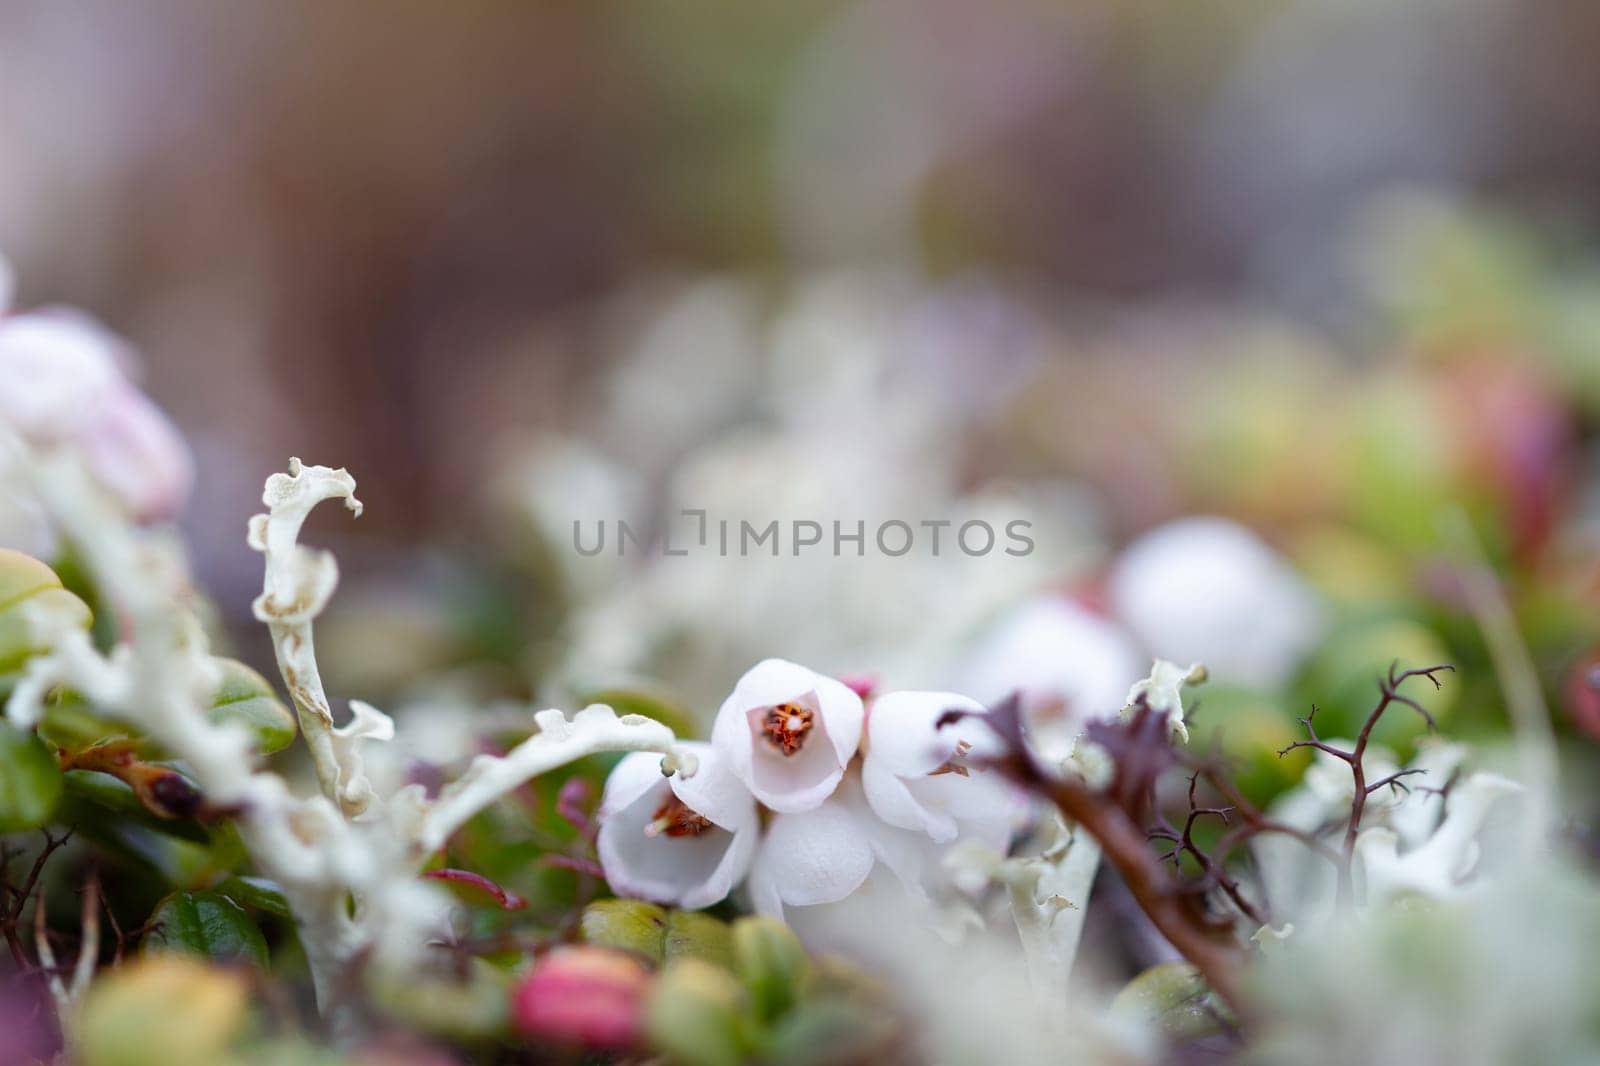 Flower of a lingonberry or cranberry growing on cryptogamic mat in the arctic tundra.. It is a low evergreen shrub with creeping horizontal roots with three (3) to eight (8) inches upright branches. The many leaves are shiny, oval, hard and evergreen with rolled over edges. The pink and white bell-shaped flowers are clustered at the end of the branches and produce tasty, tart, firm, round, red berries.